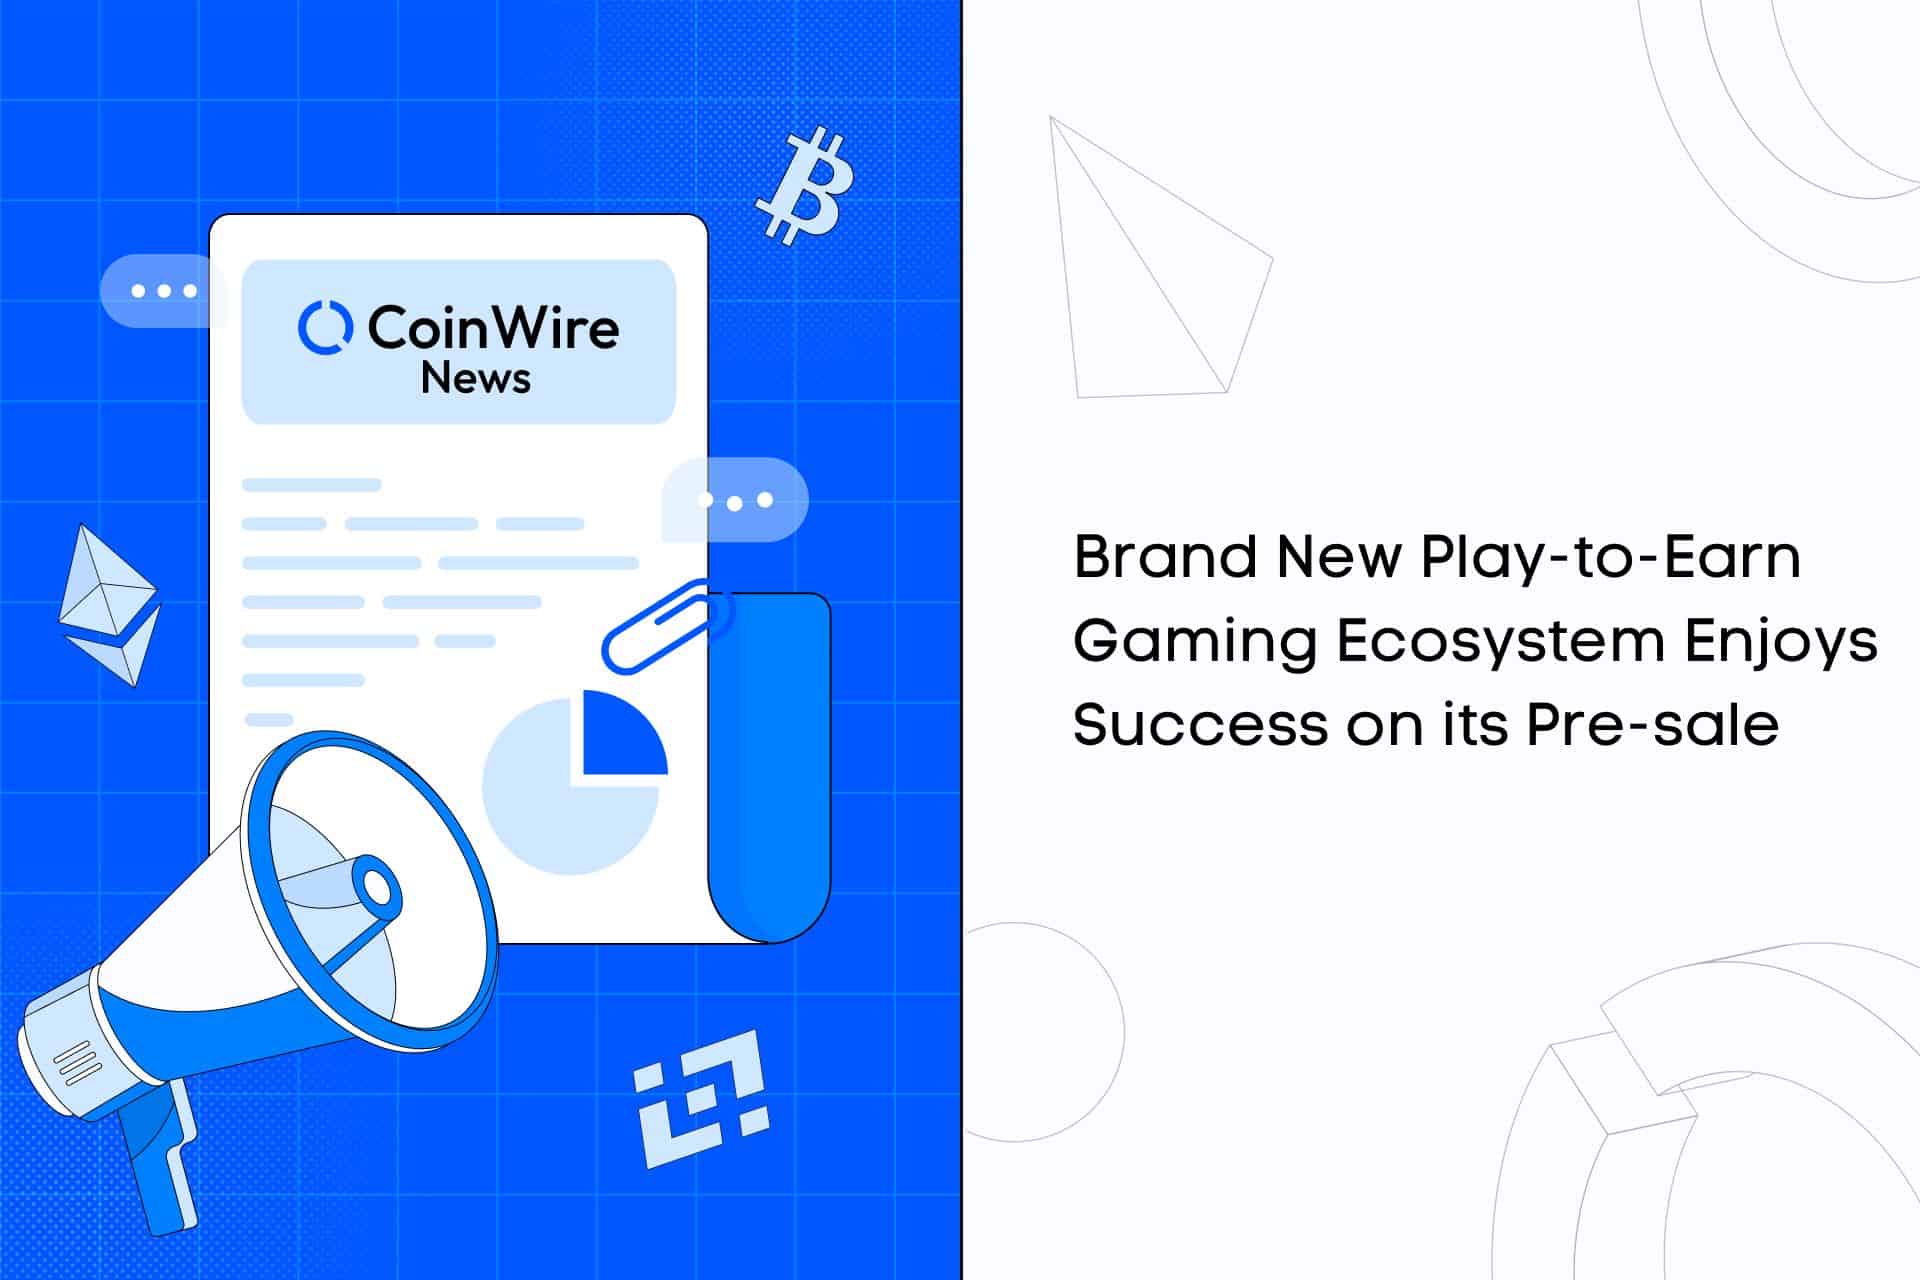 Brand New Play-To-Earn Gaming Ecosystem Enjoys Success On Its Pre-Sale